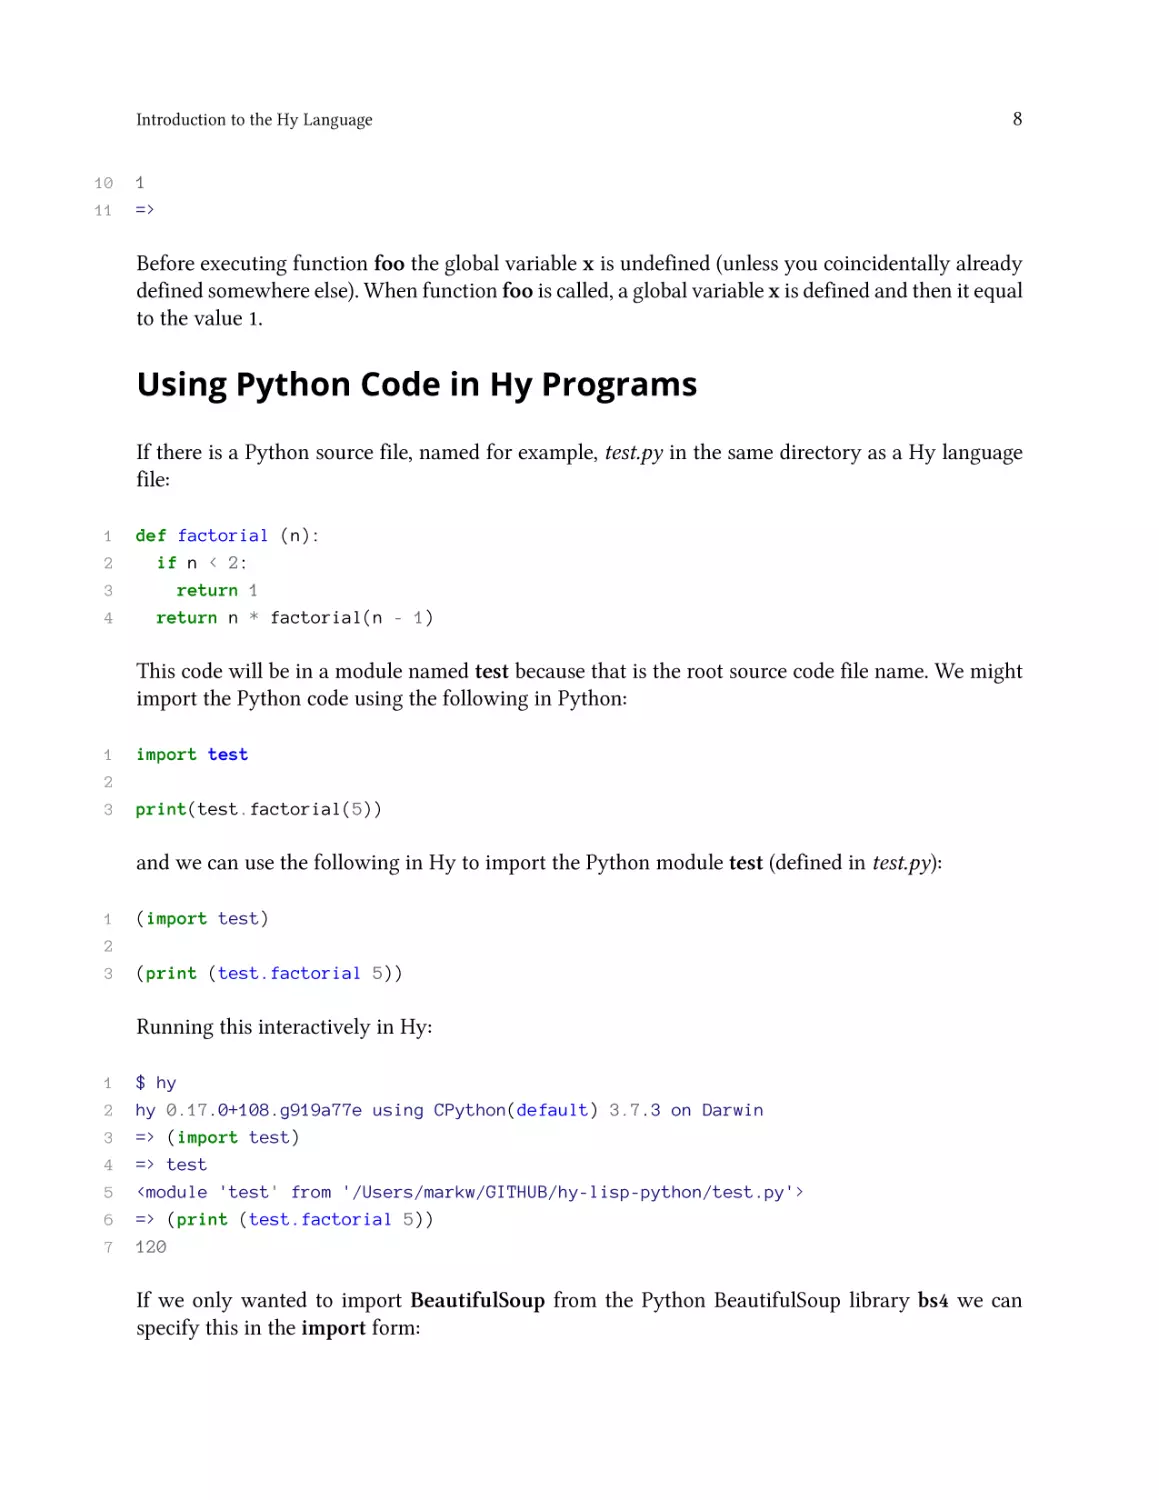 Using Python Code in Hy Programs